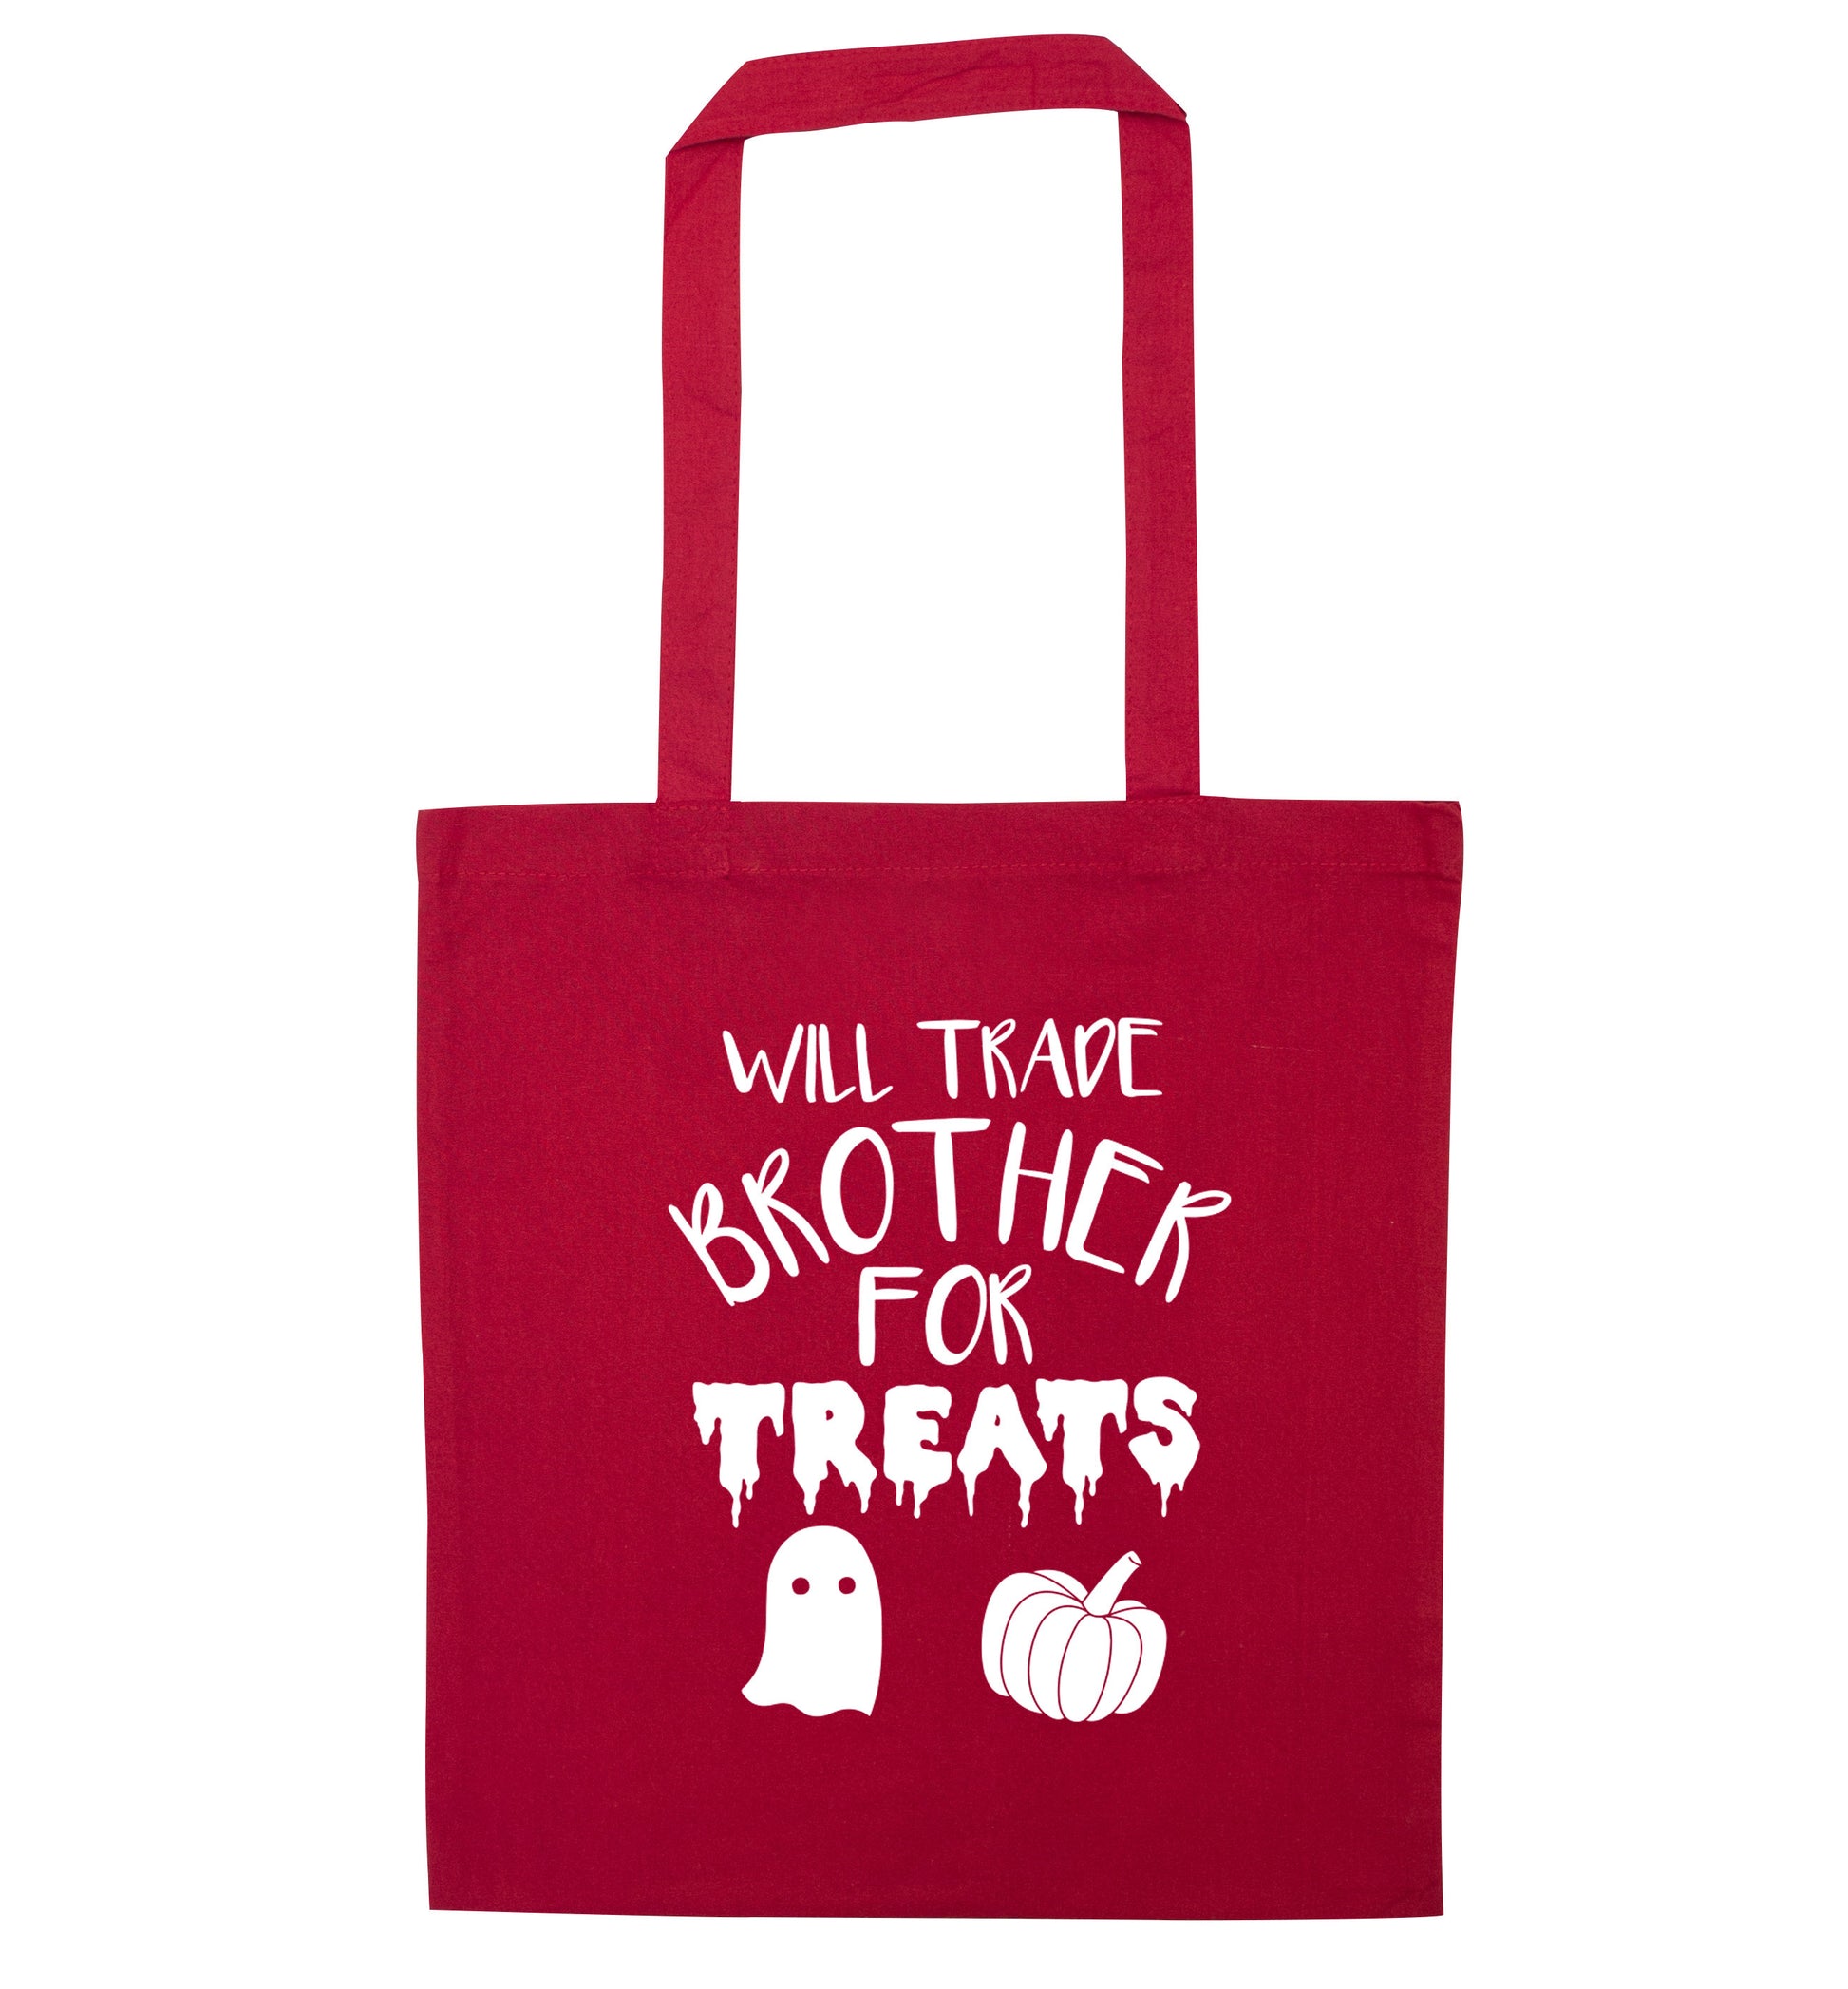 Will trade brother for treats red tote bag